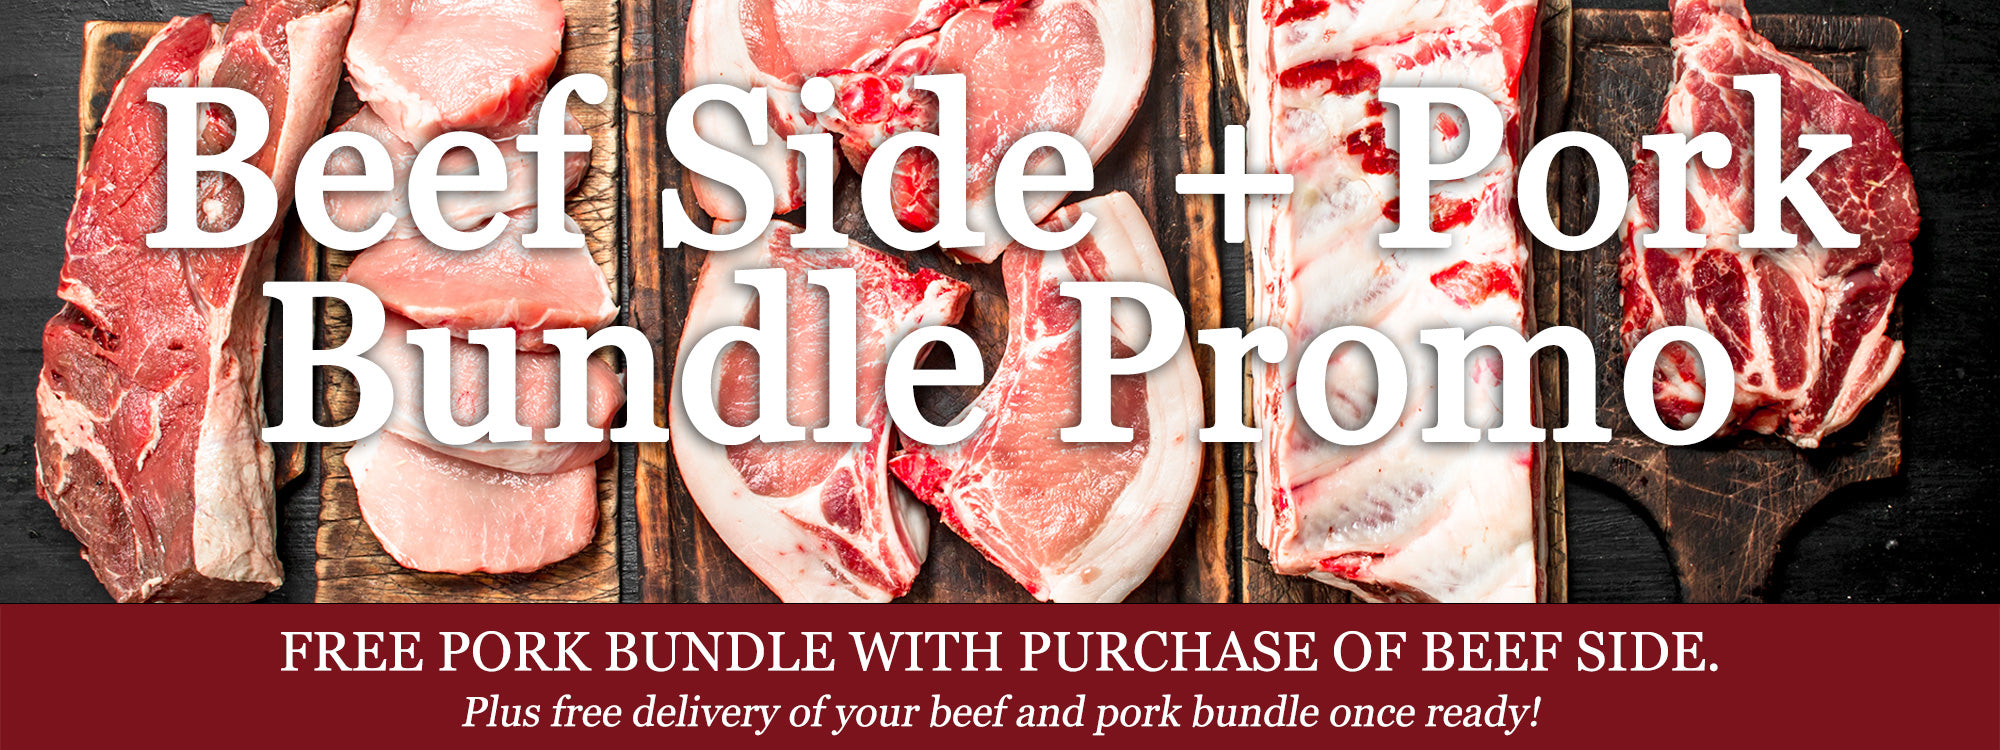 Free Pork Bundle with purchase of Beef Side.